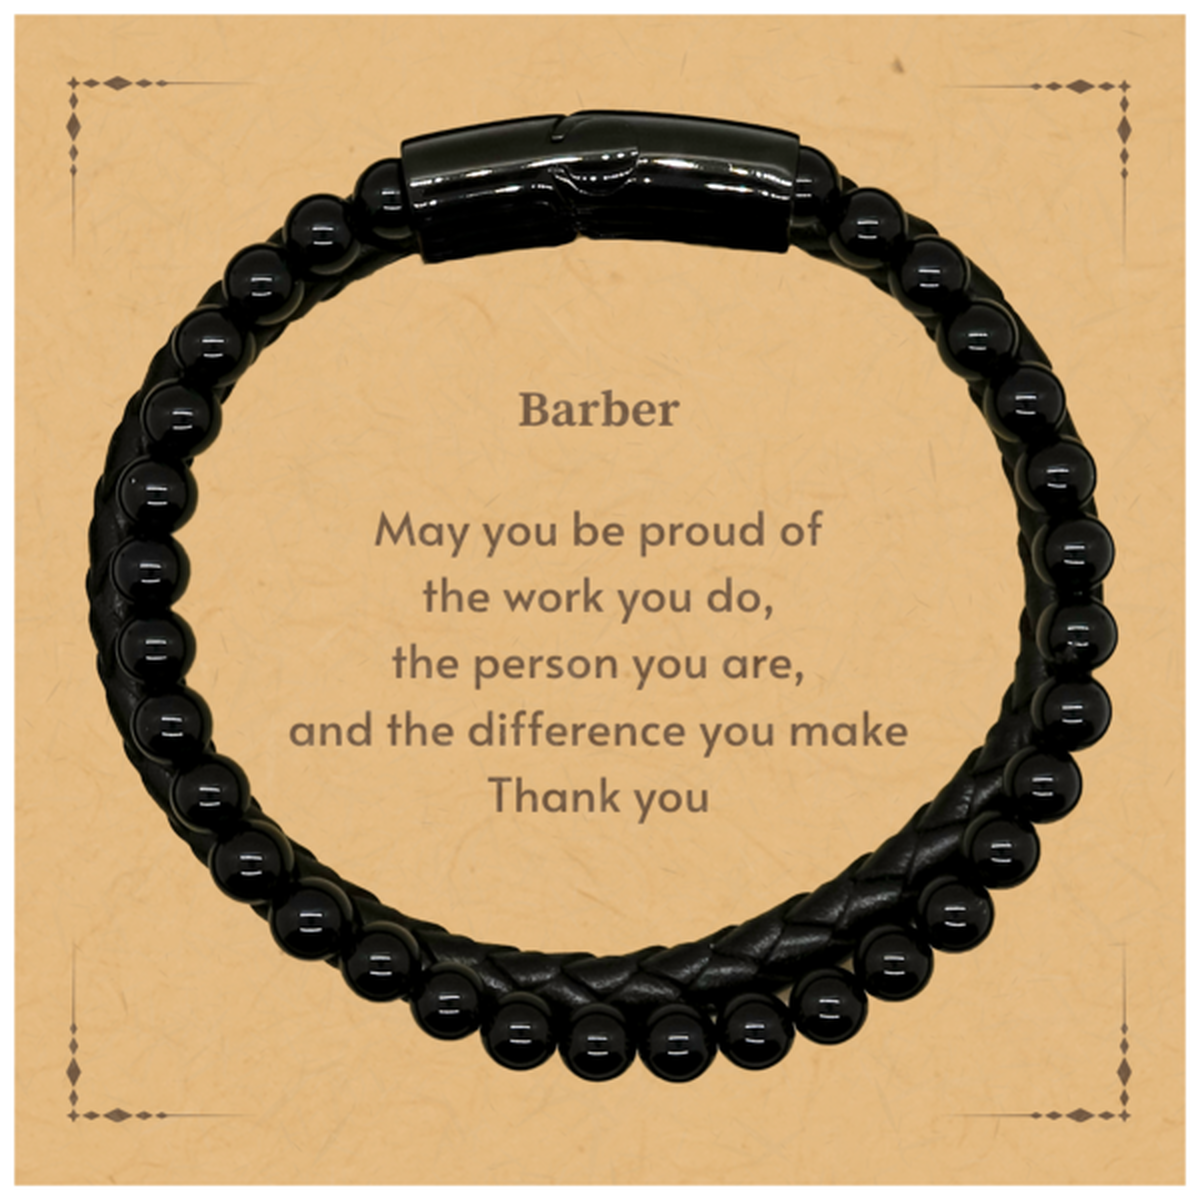 Heartwarming Stone Leather Bracelets Retirement Coworkers Gifts for Barber, Barber May You be proud of the work you do, the person you are Gifts for Boss Men Women Friends